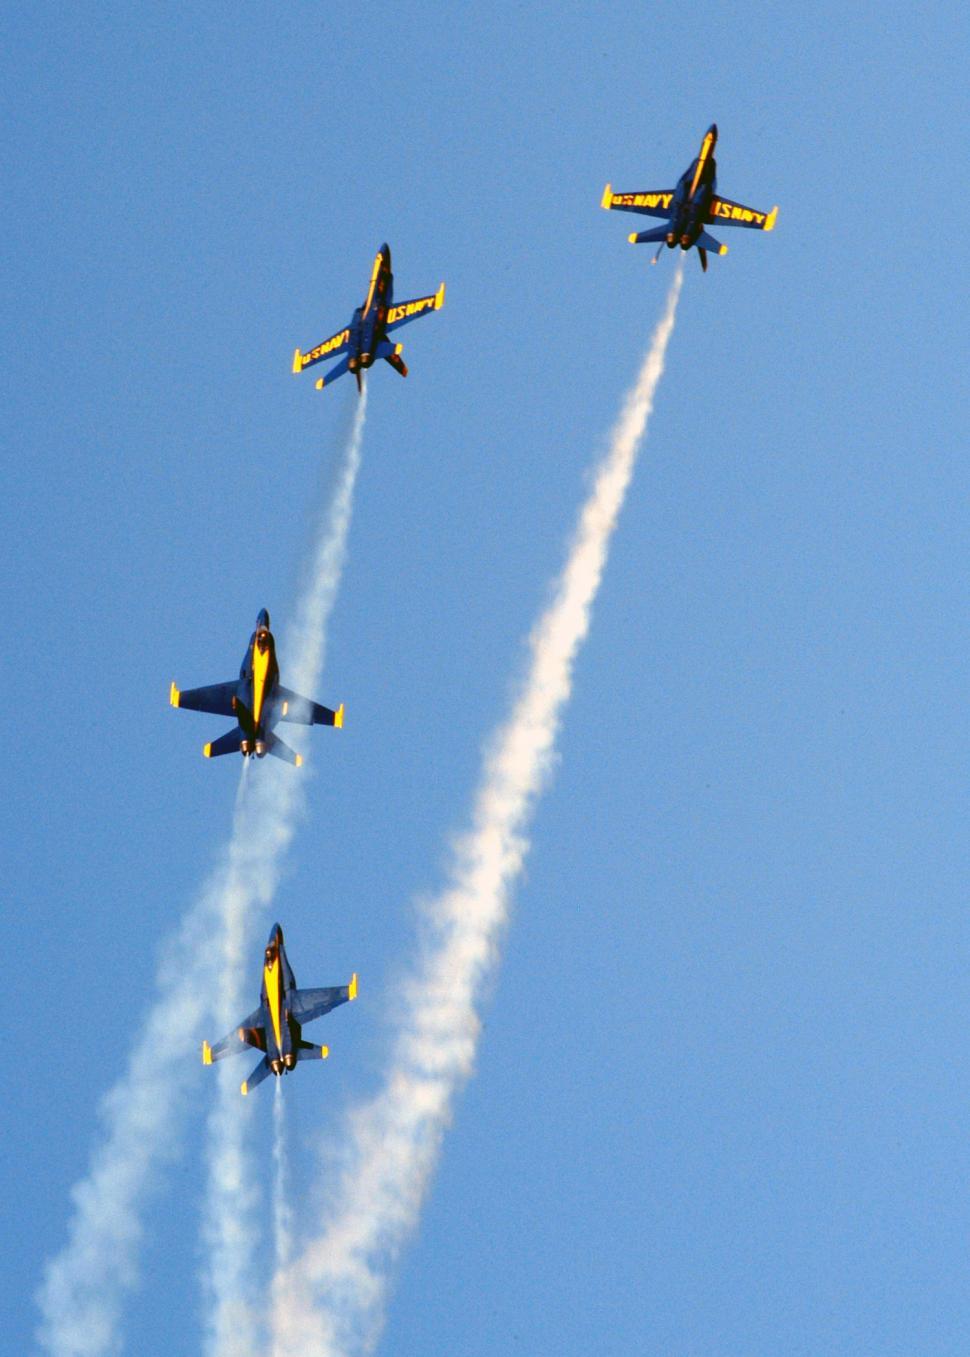 Free Image of Group of Airplanes Flying Through Blue Sky 